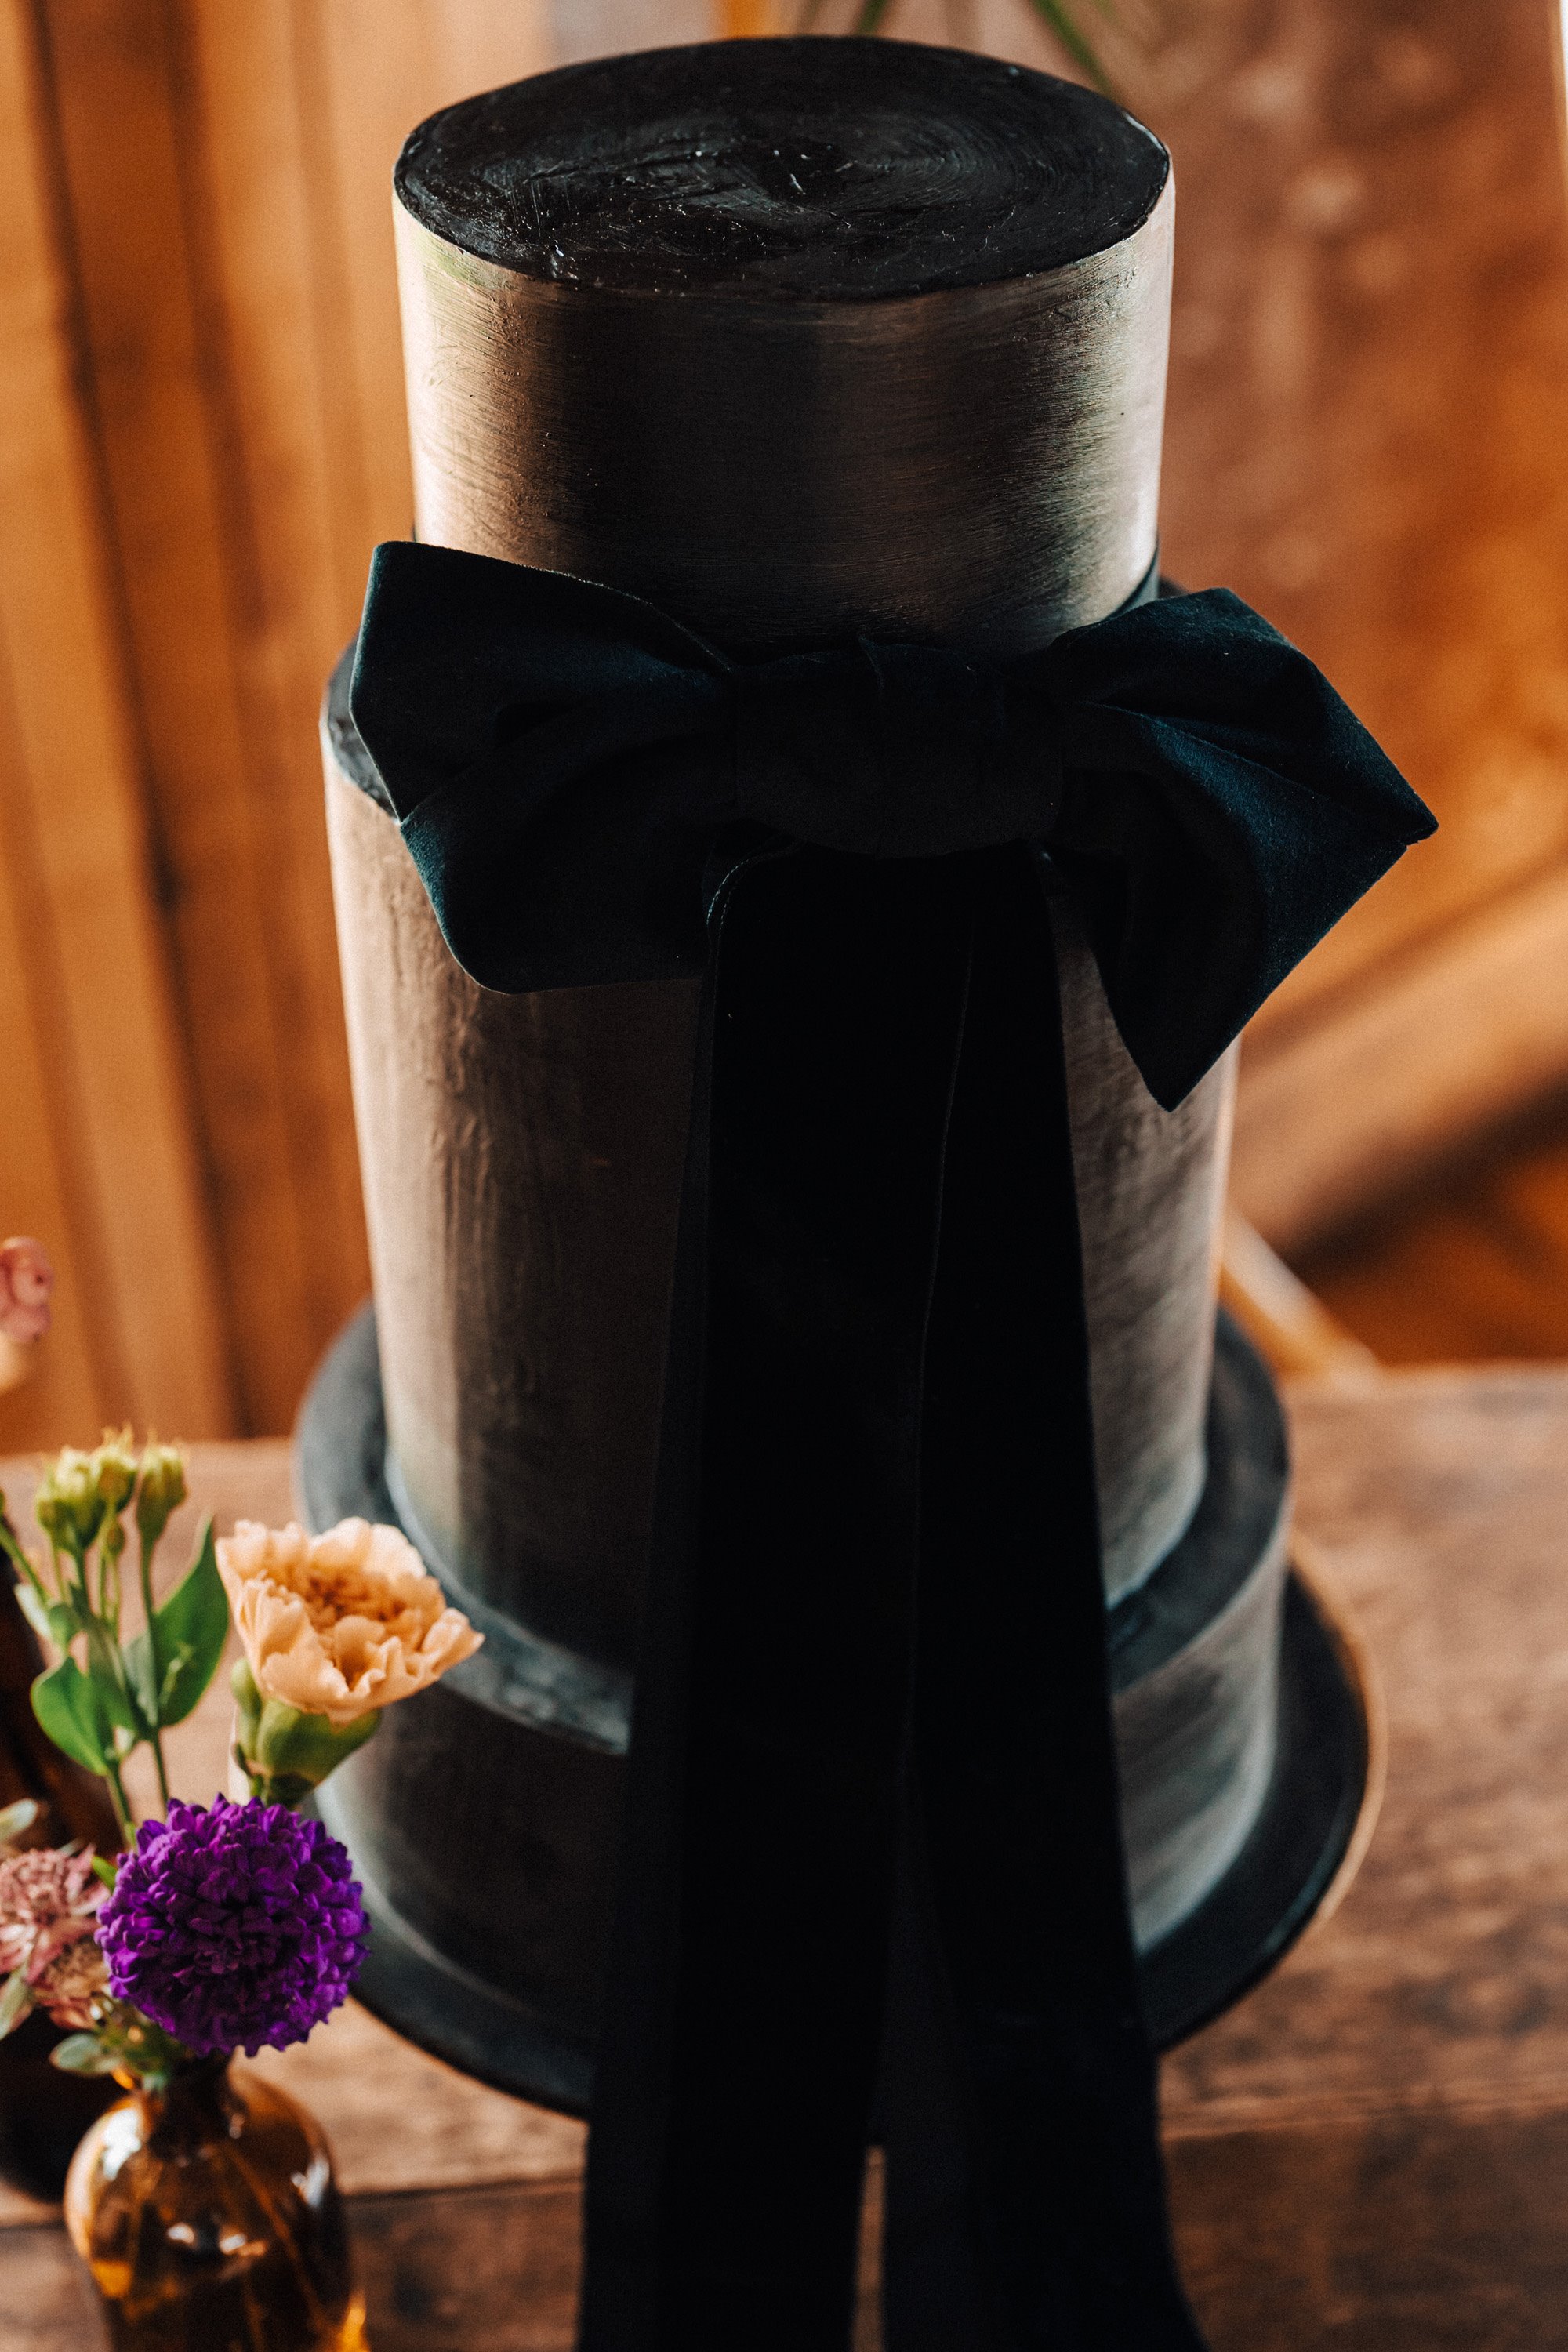 This Black wedding cake with velvet ribbon was handmade by the bride herself for her magical moody wedding with dark details at a mansion house near halloween in october 